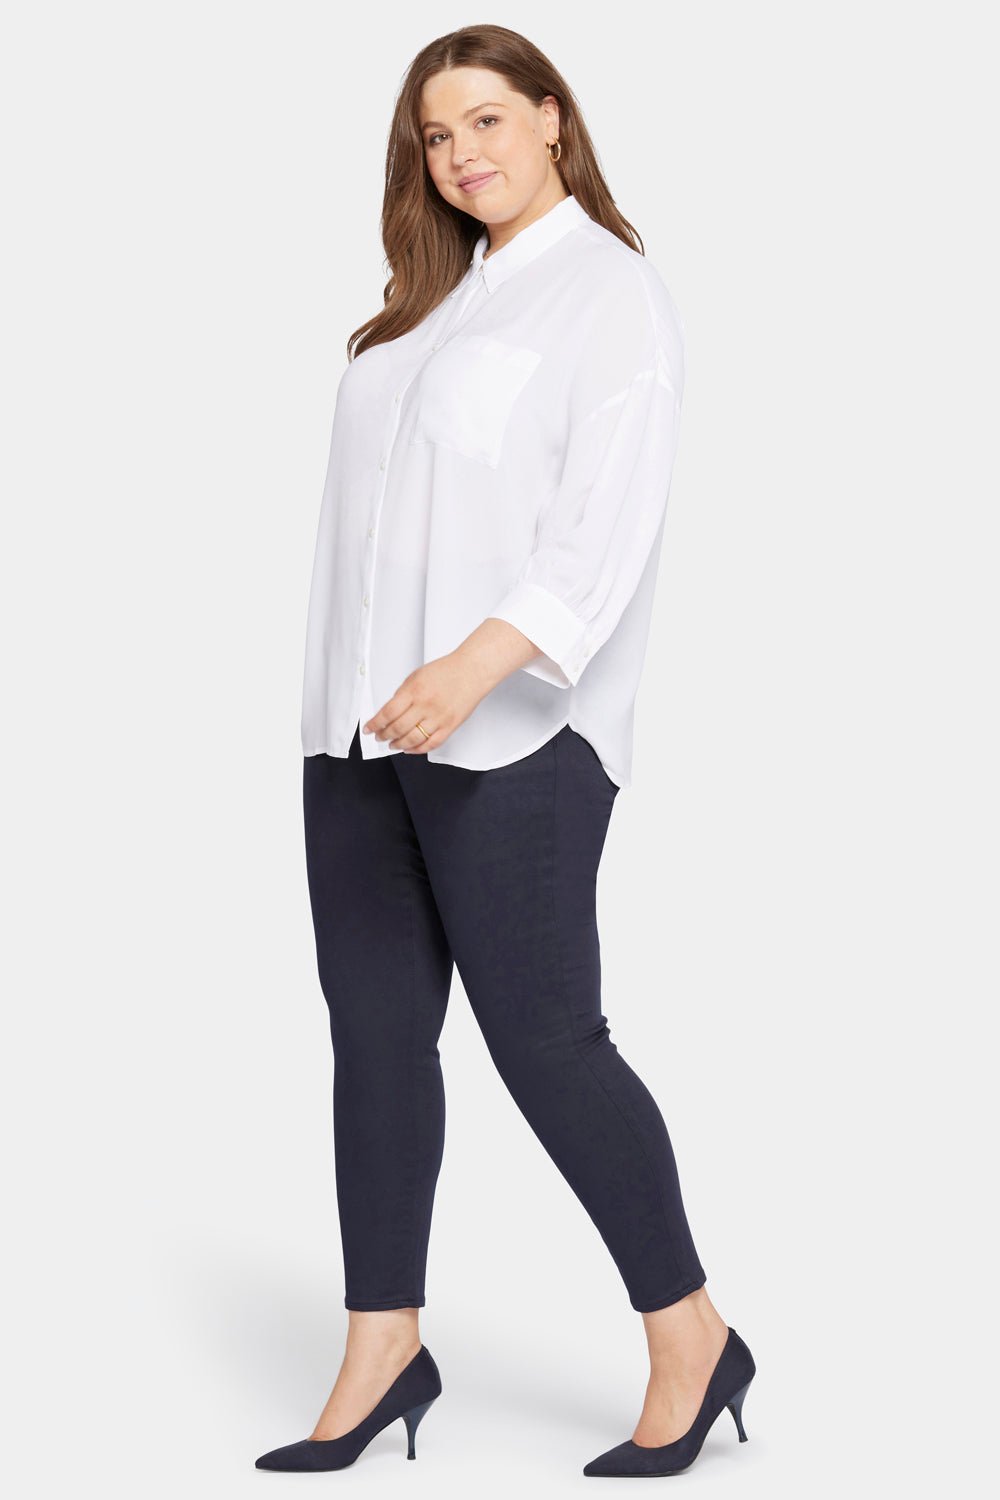 NYDJ Zoey Blouse in Plus Size  - Optic White